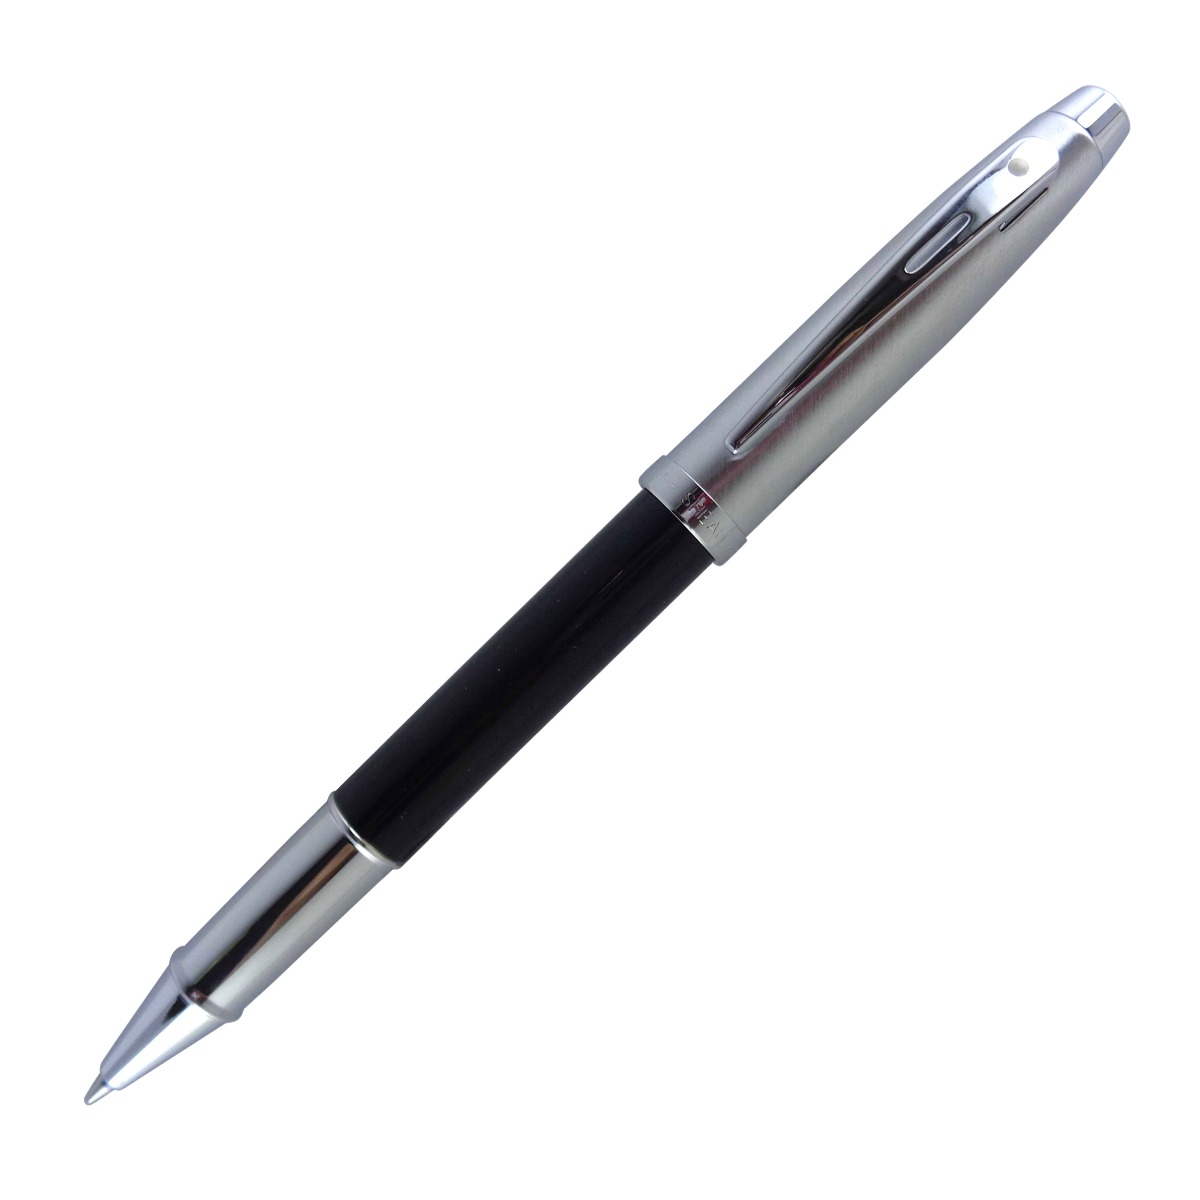 Sheaffer A9313 RB Model: 15191 Glossy Black color body with silver color cap medium tip cap type roller ball